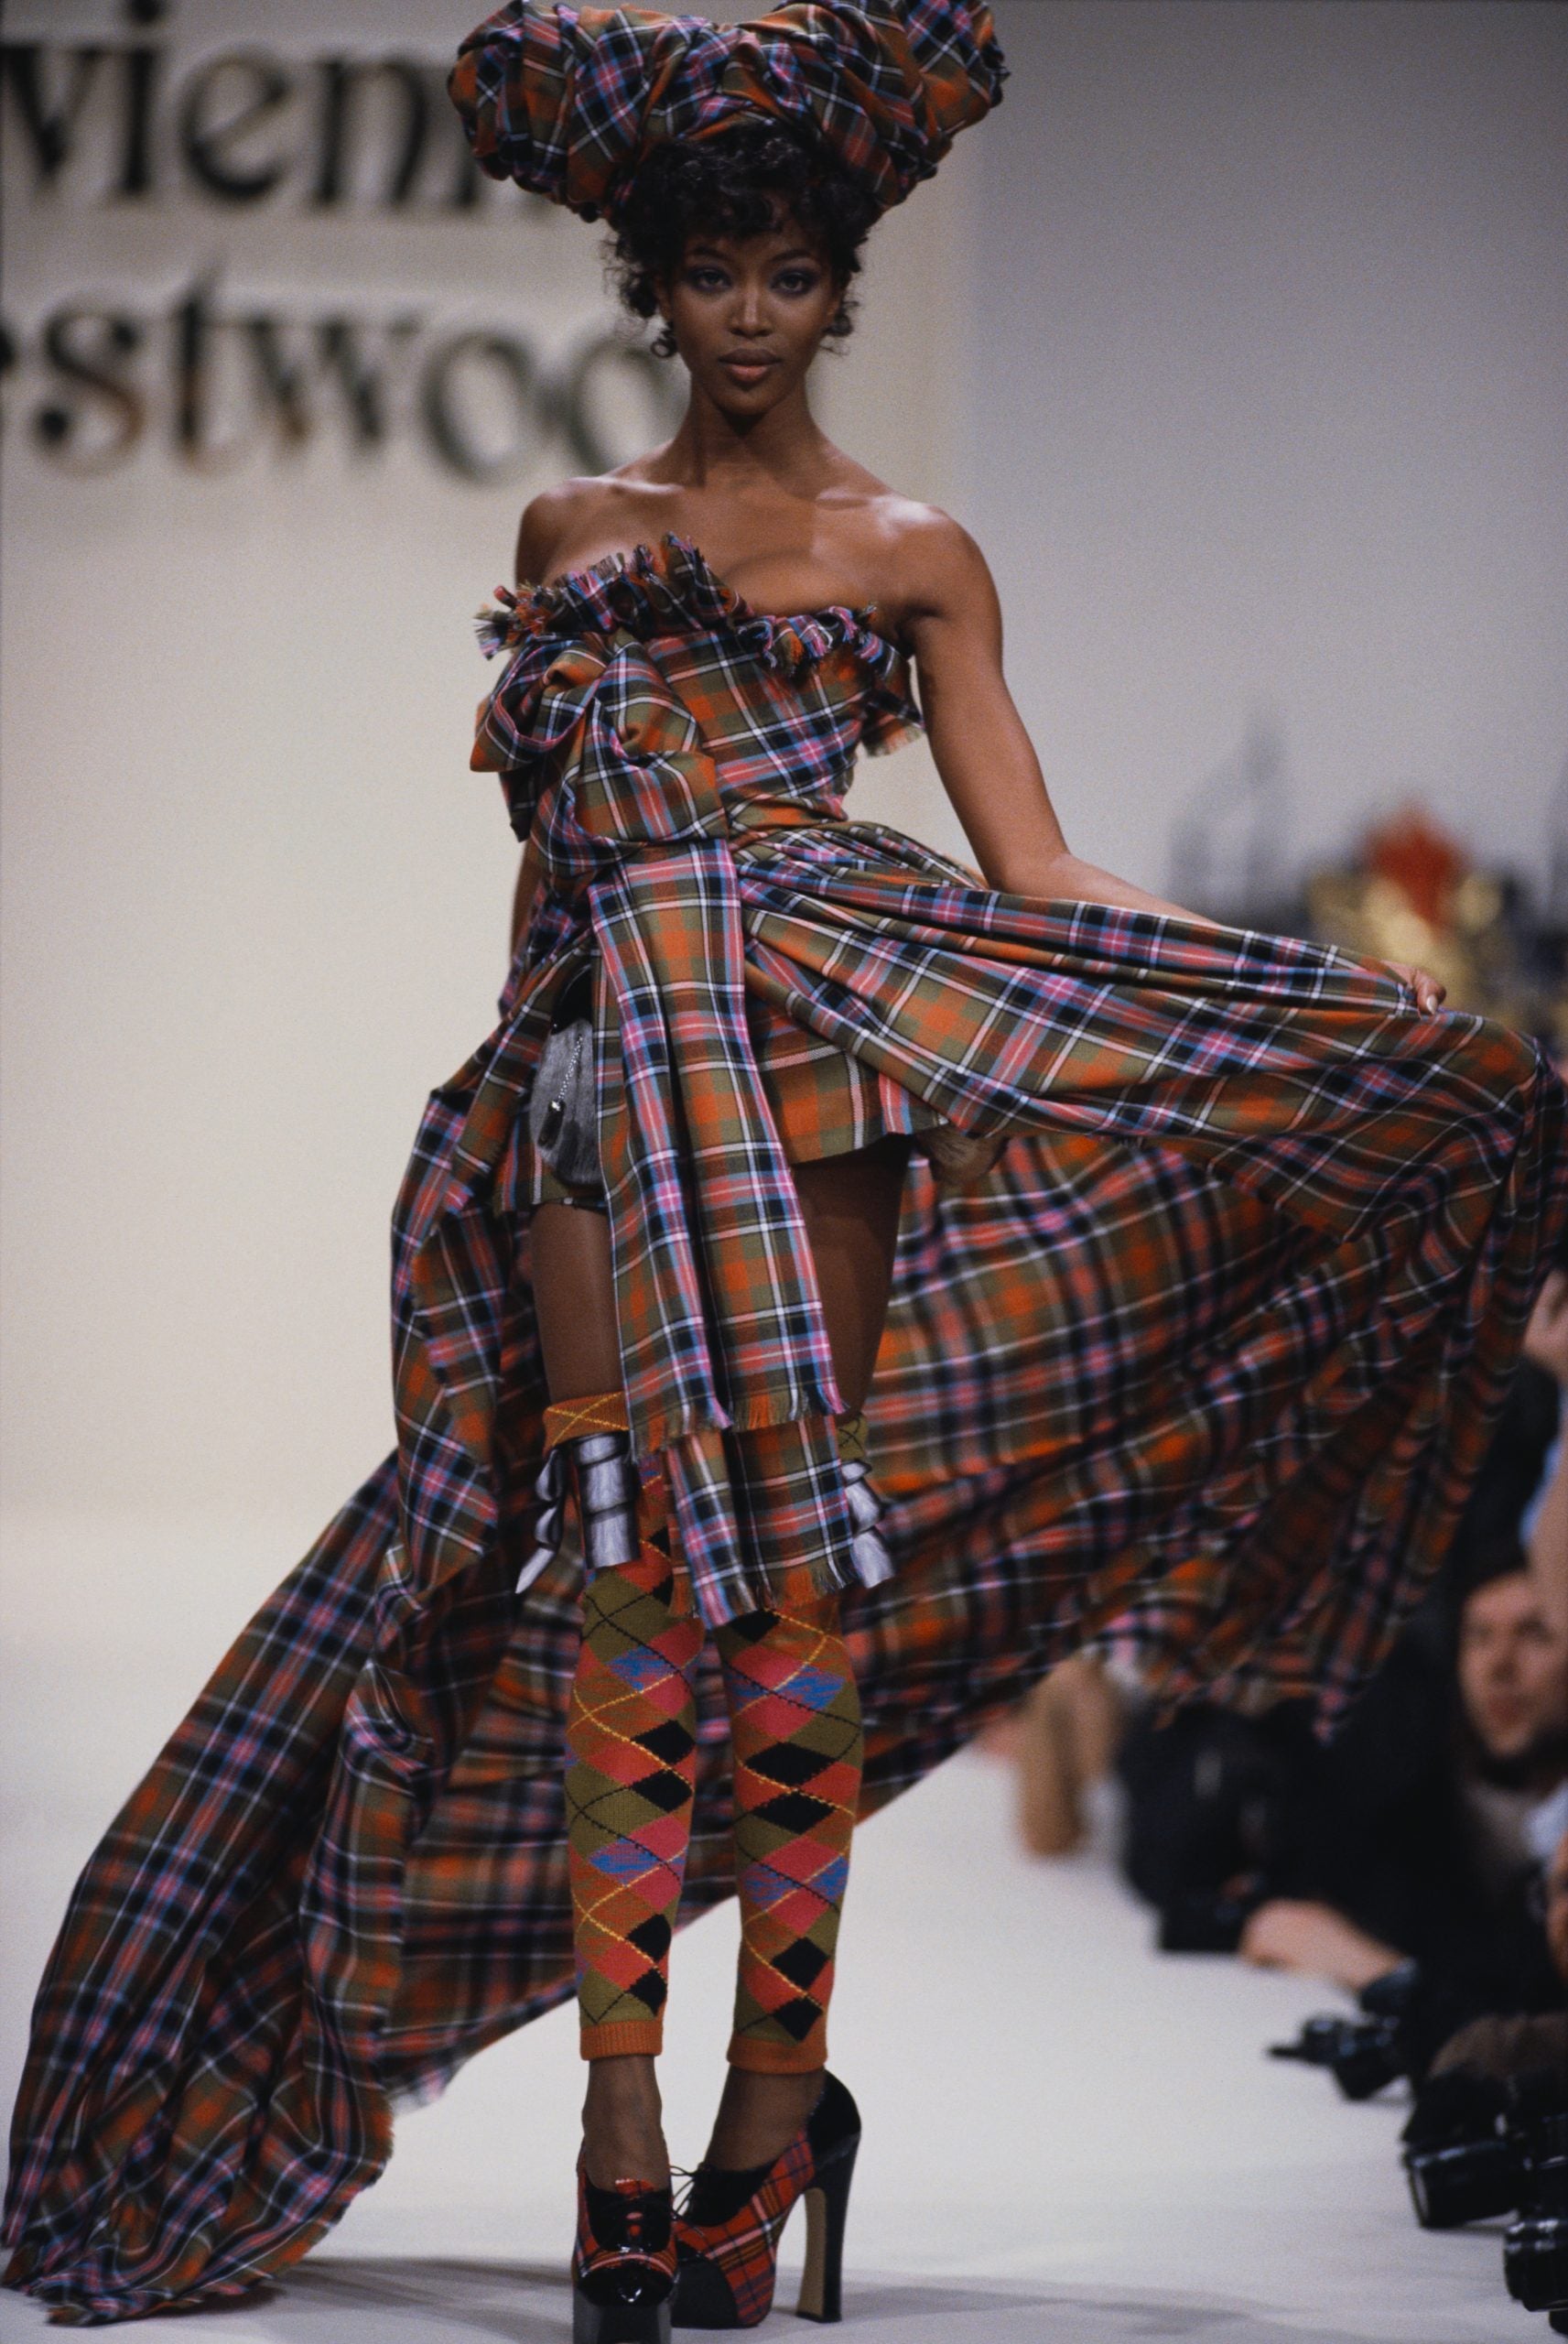 Black Is Punk! Remembering Vivienne Westwood & Why Her Punk Aesthetic ...